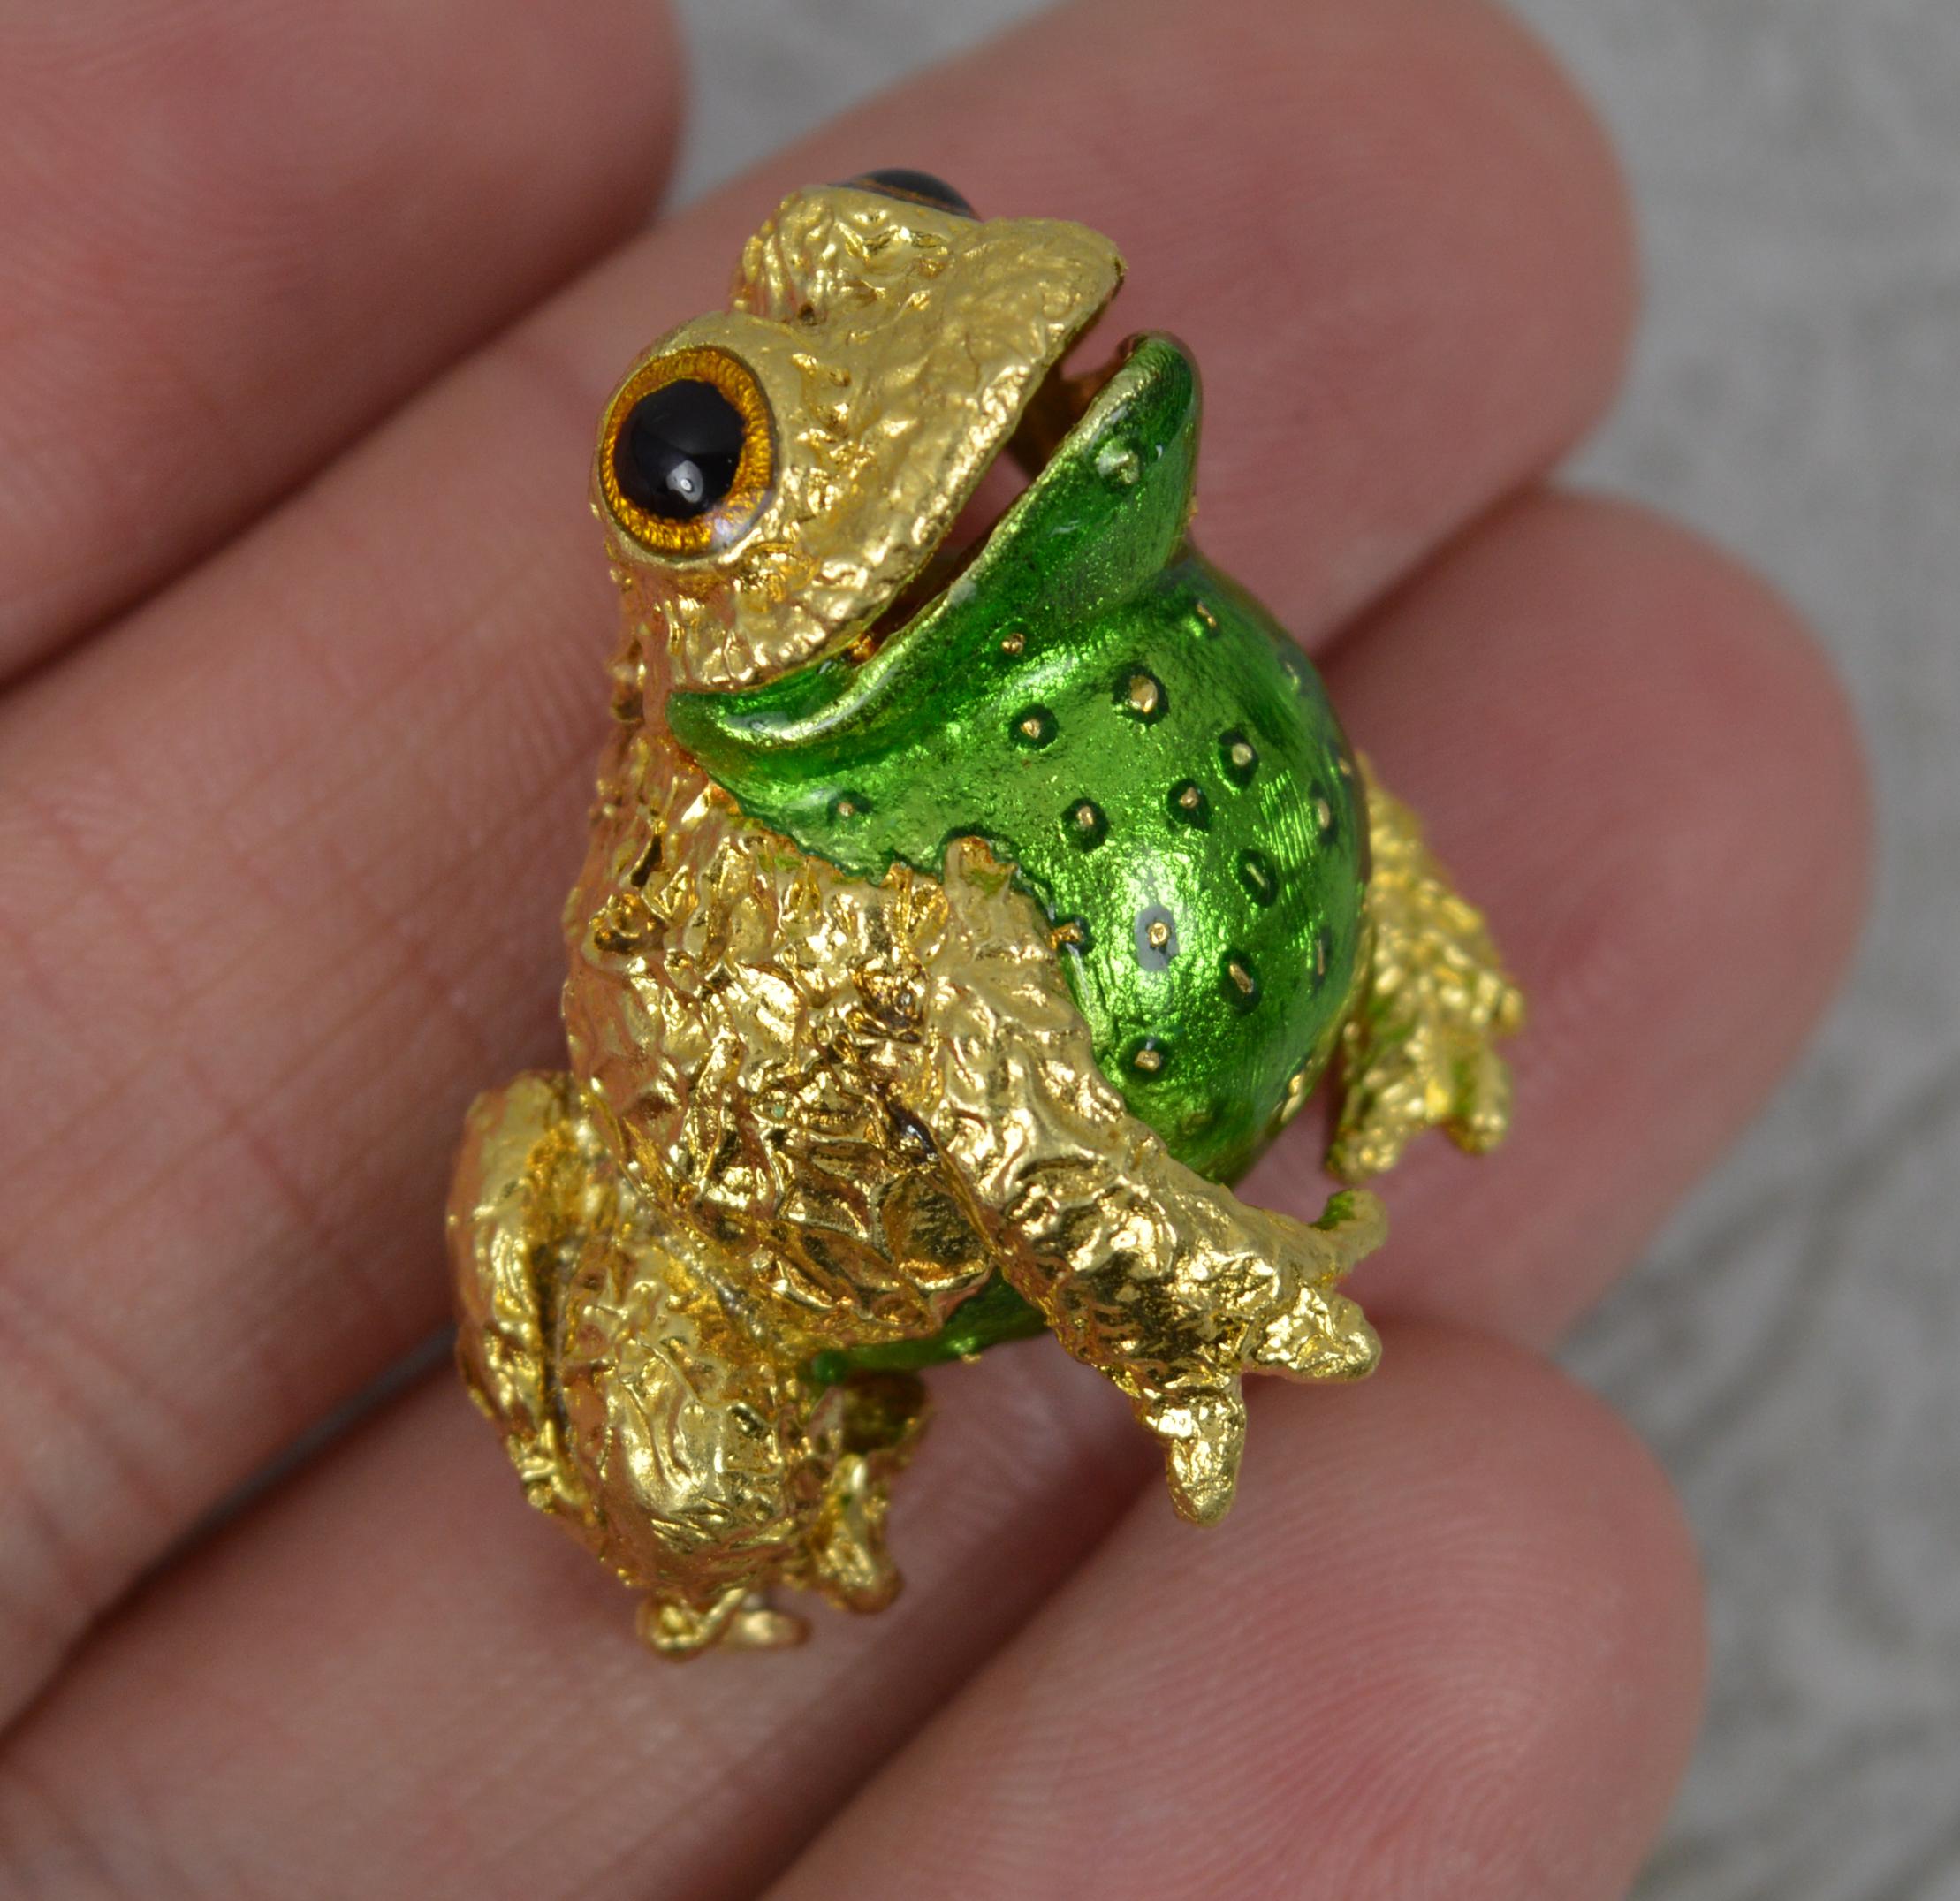 A stunning Frog shaped brooch.
Solid and heavy 18 carat yellow gold example.
Designed with a very bright green enamel to the body and black and orange coloured eyes.
Top quality piece, circa 1970.

CONDITION ; Excellent. Working pin and clasp. Clean